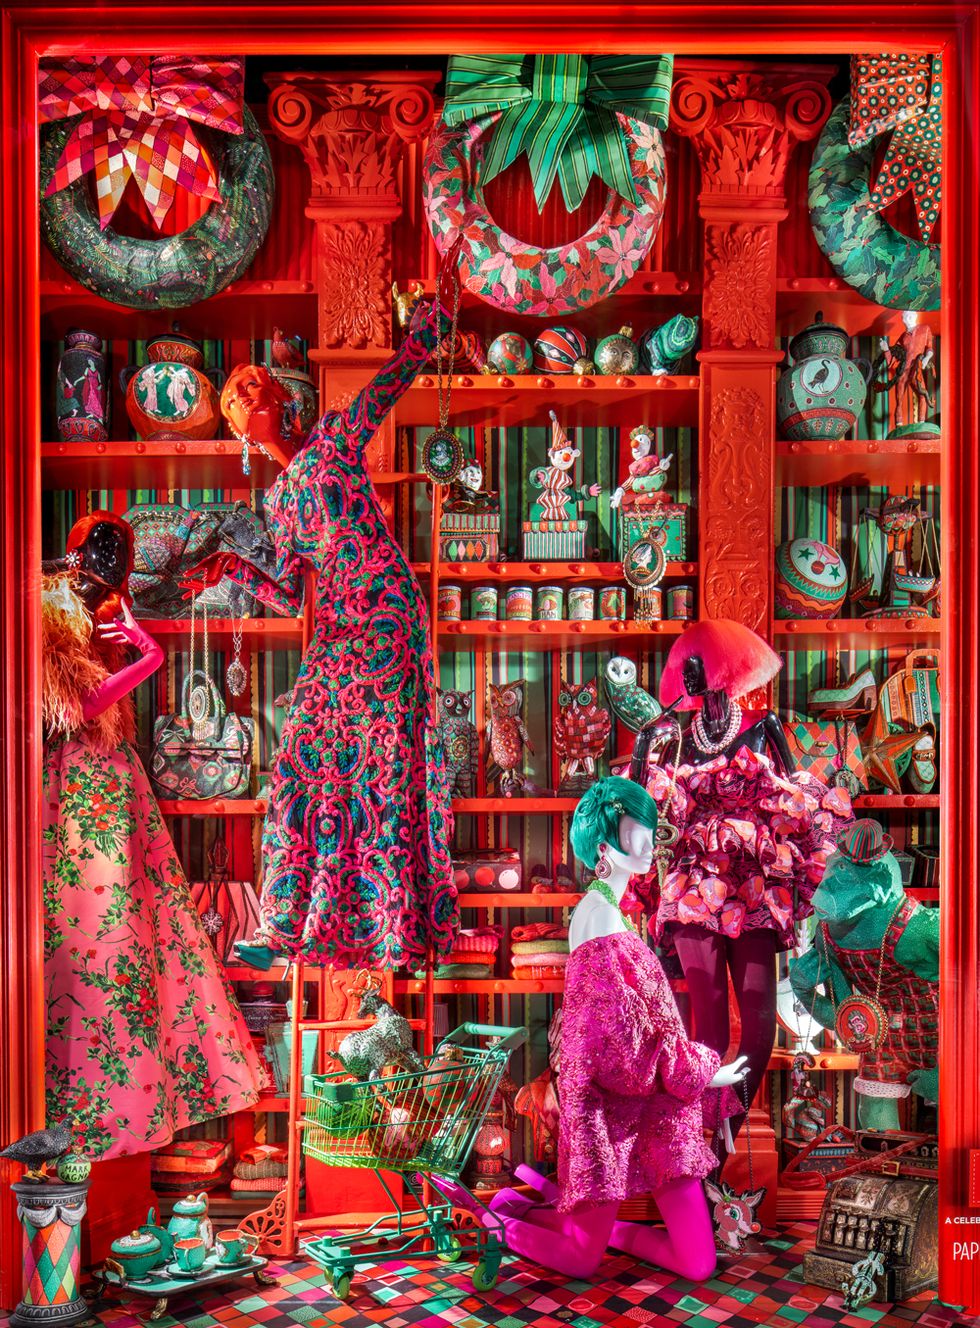 The Best 2018 Holiday Windows Displays in New York City